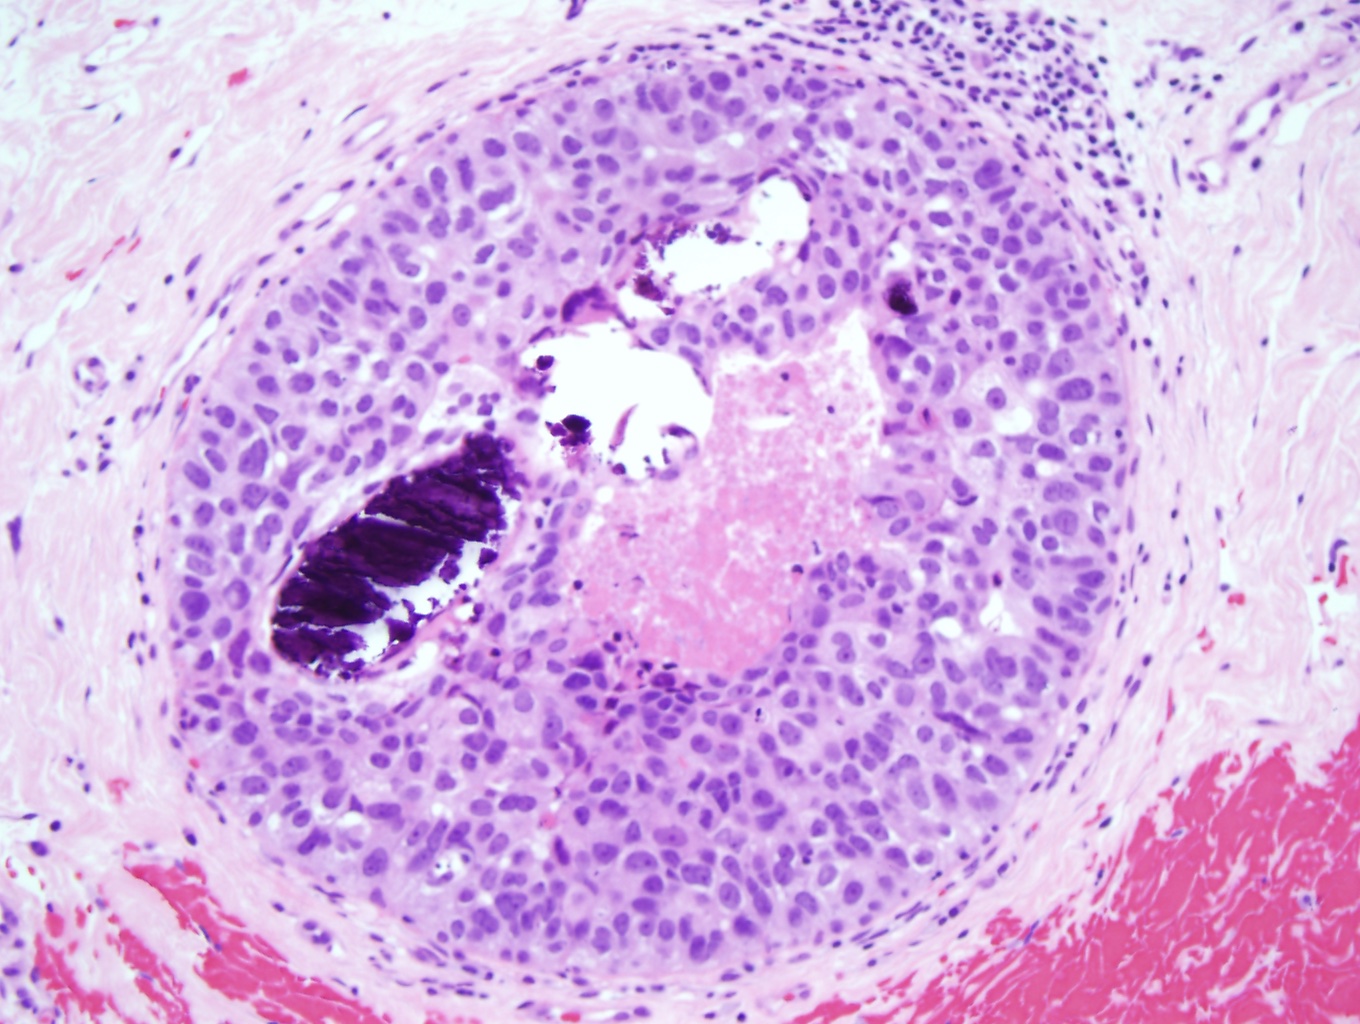 The image shows high grade ductal carcinoma (x10)